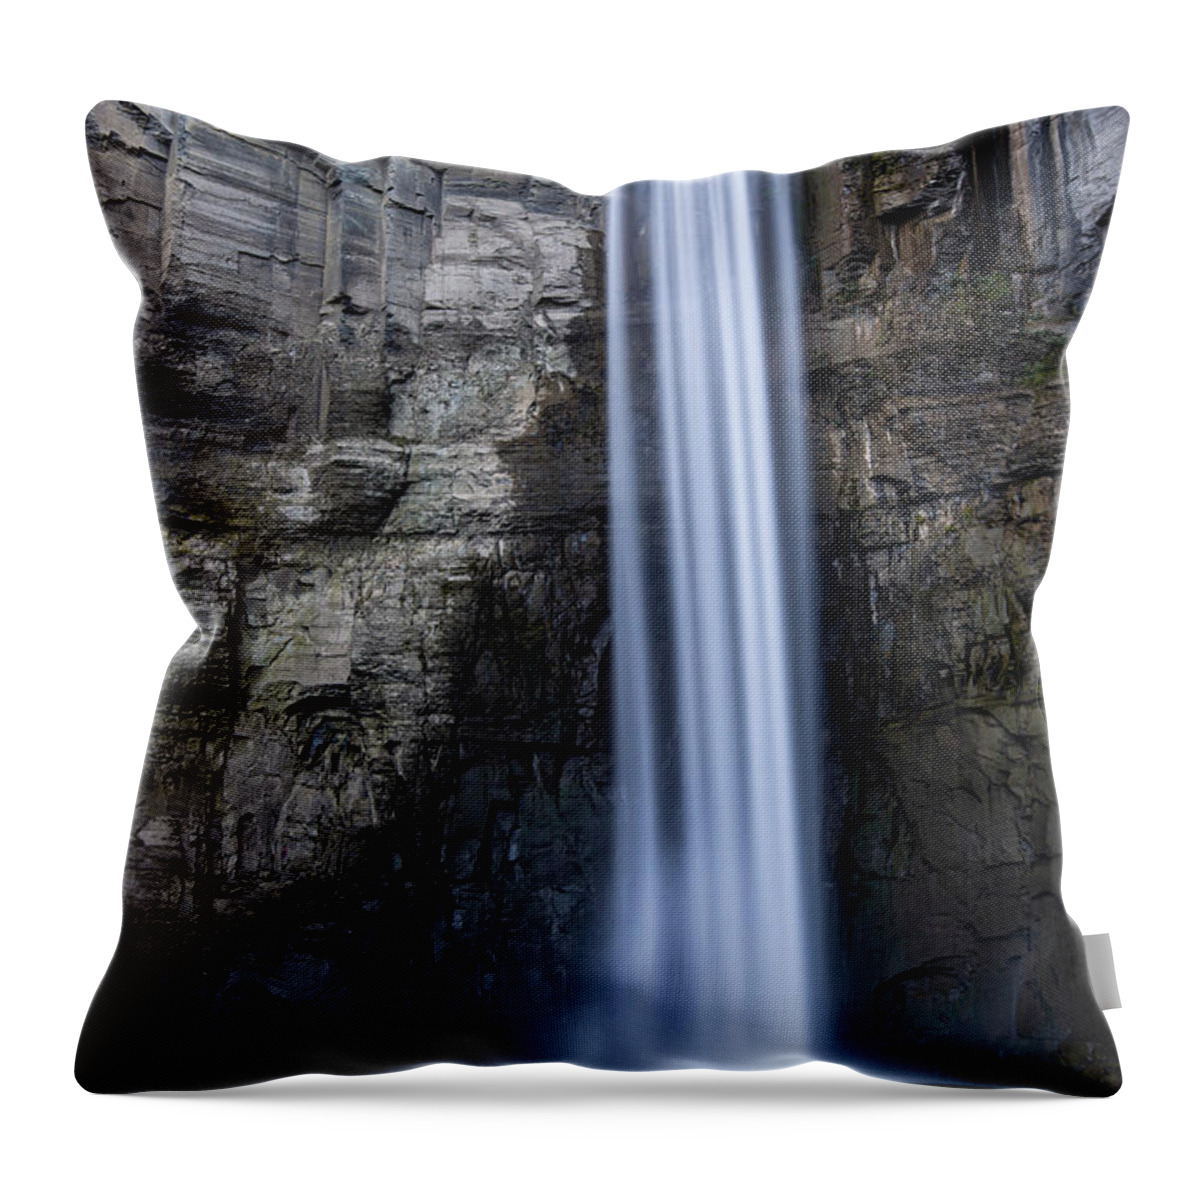 Taughannock Falls Throw Pillow featuring the photograph Taughannock Falls 1 by Dimitry Papkov